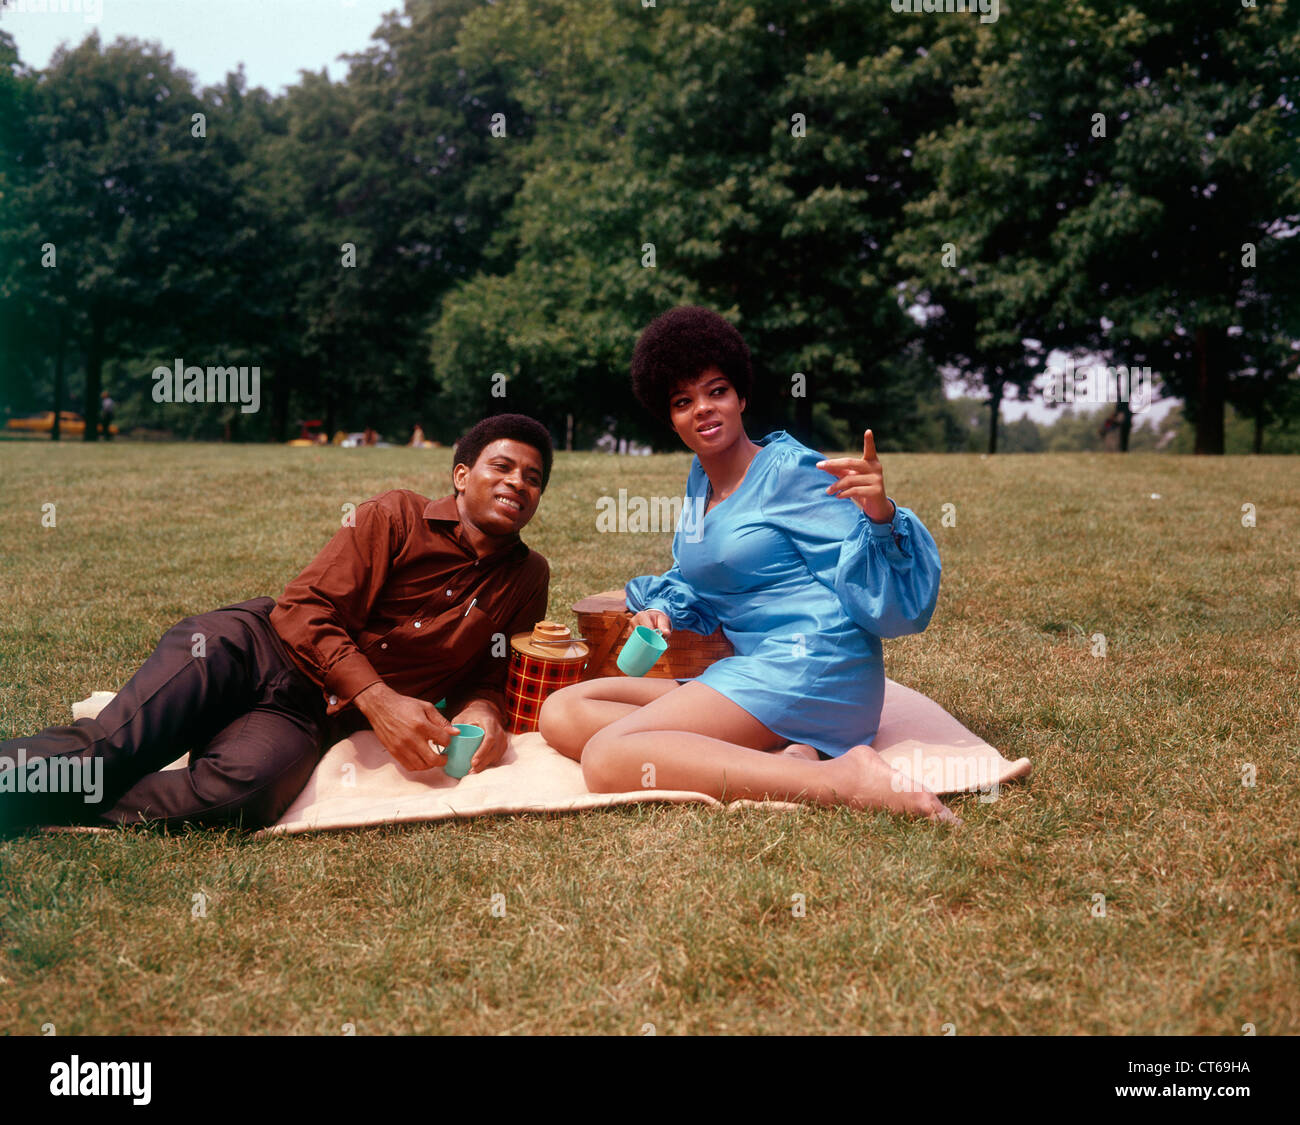 Vintage outdoor portrait of couple picnicking Stock Photo